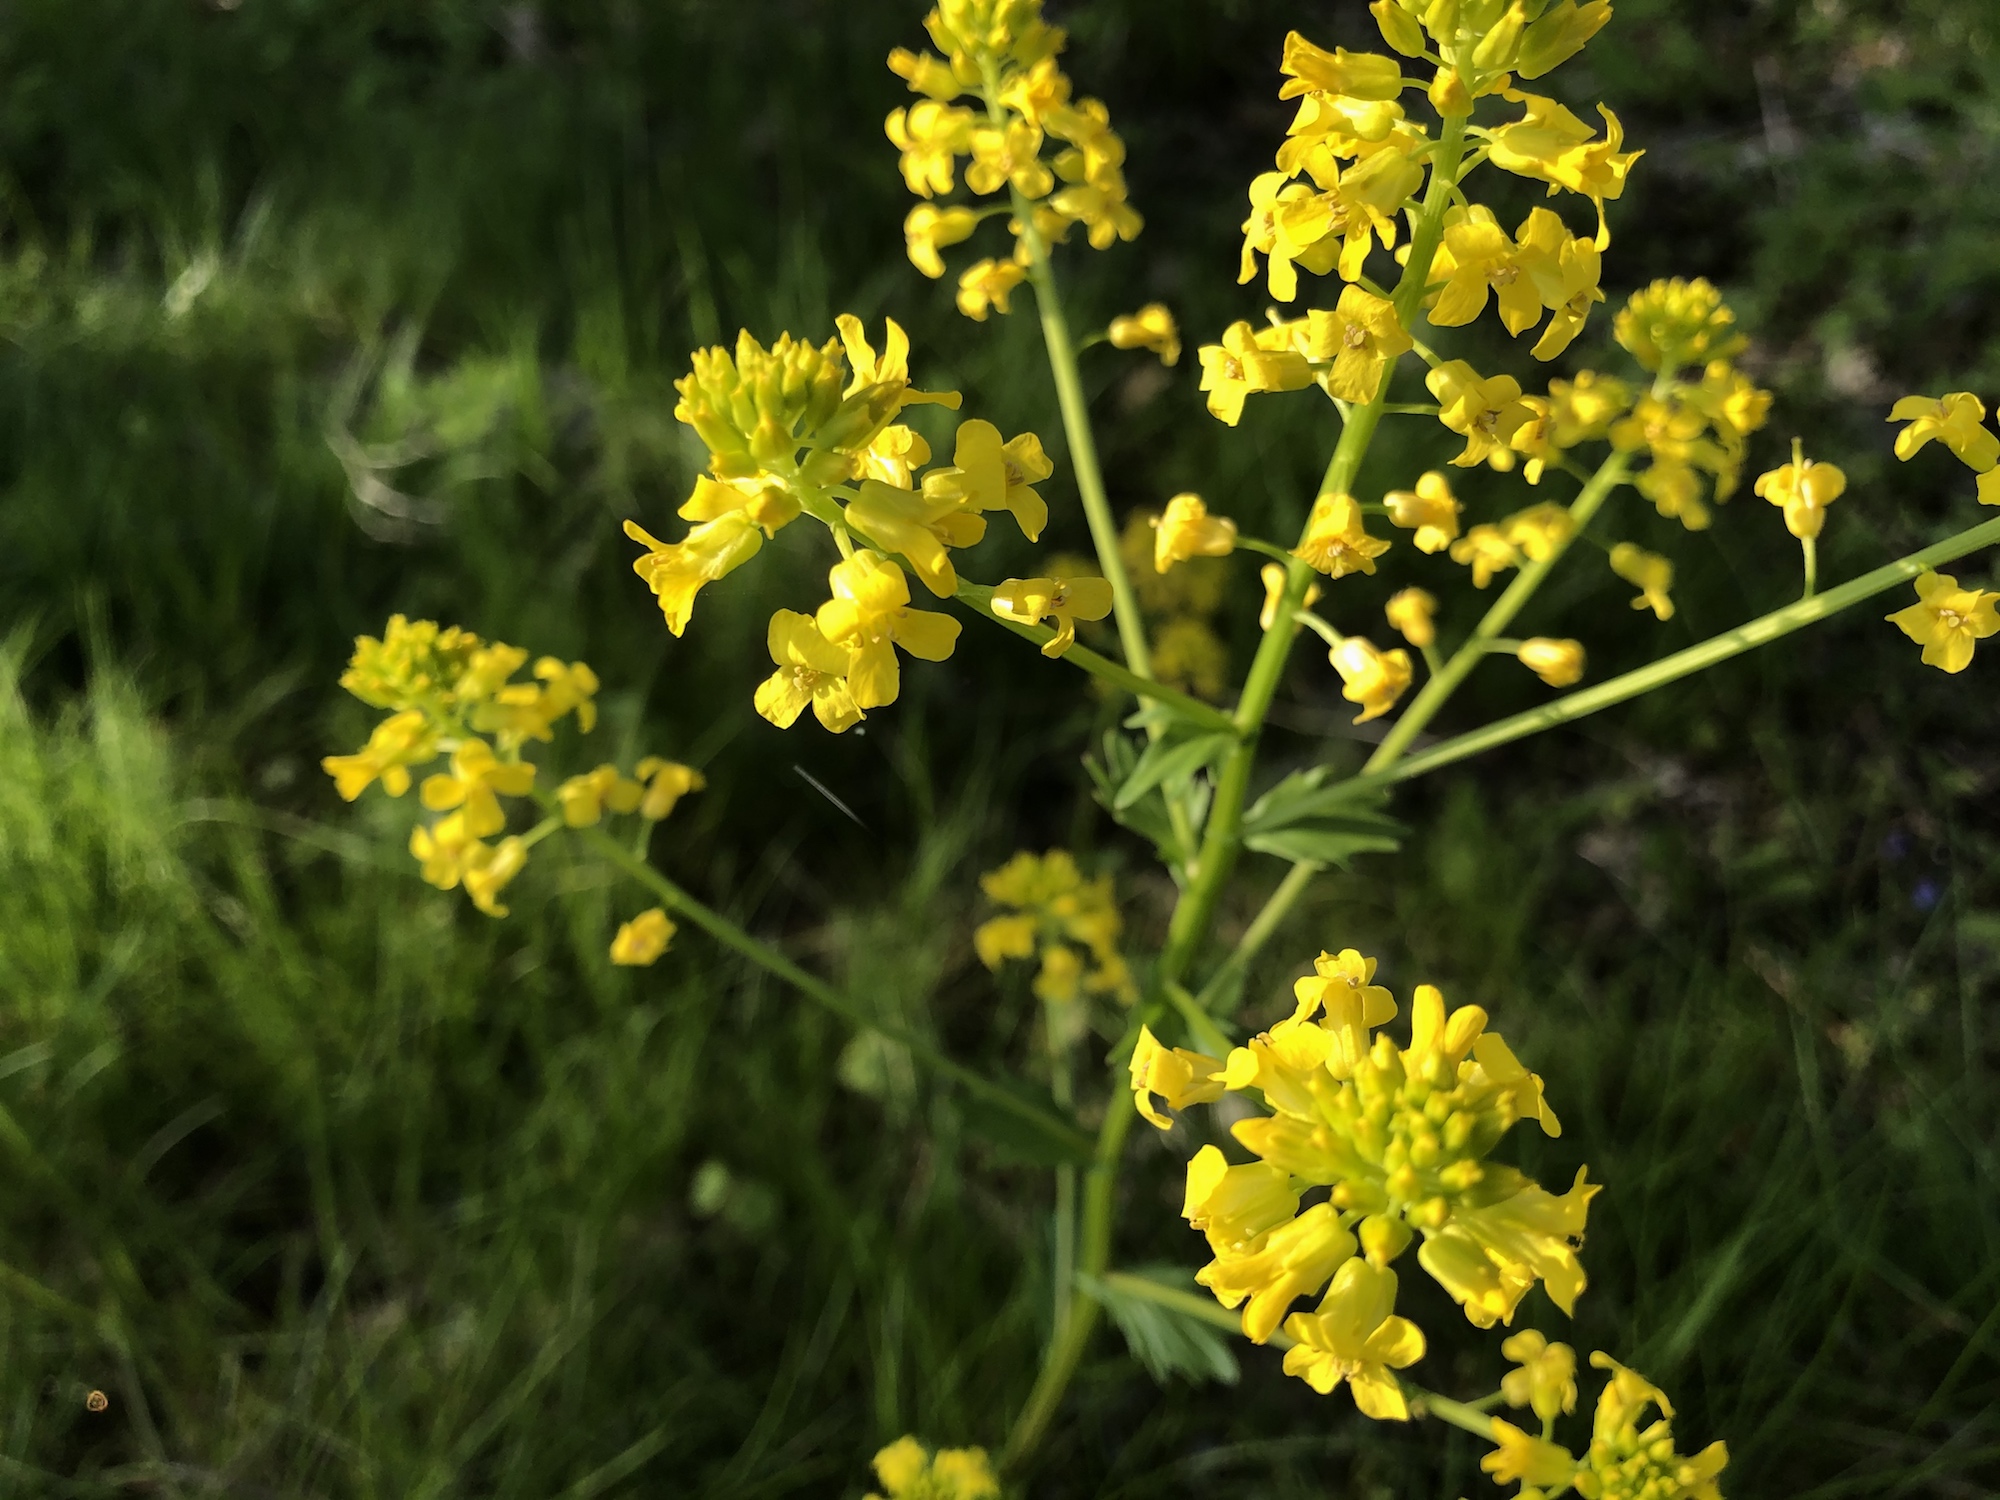 Garden Yellow Rocket in woods between Marion Dunn and Oak Savanna in Madison, Wisconsin on May 16, 2020.